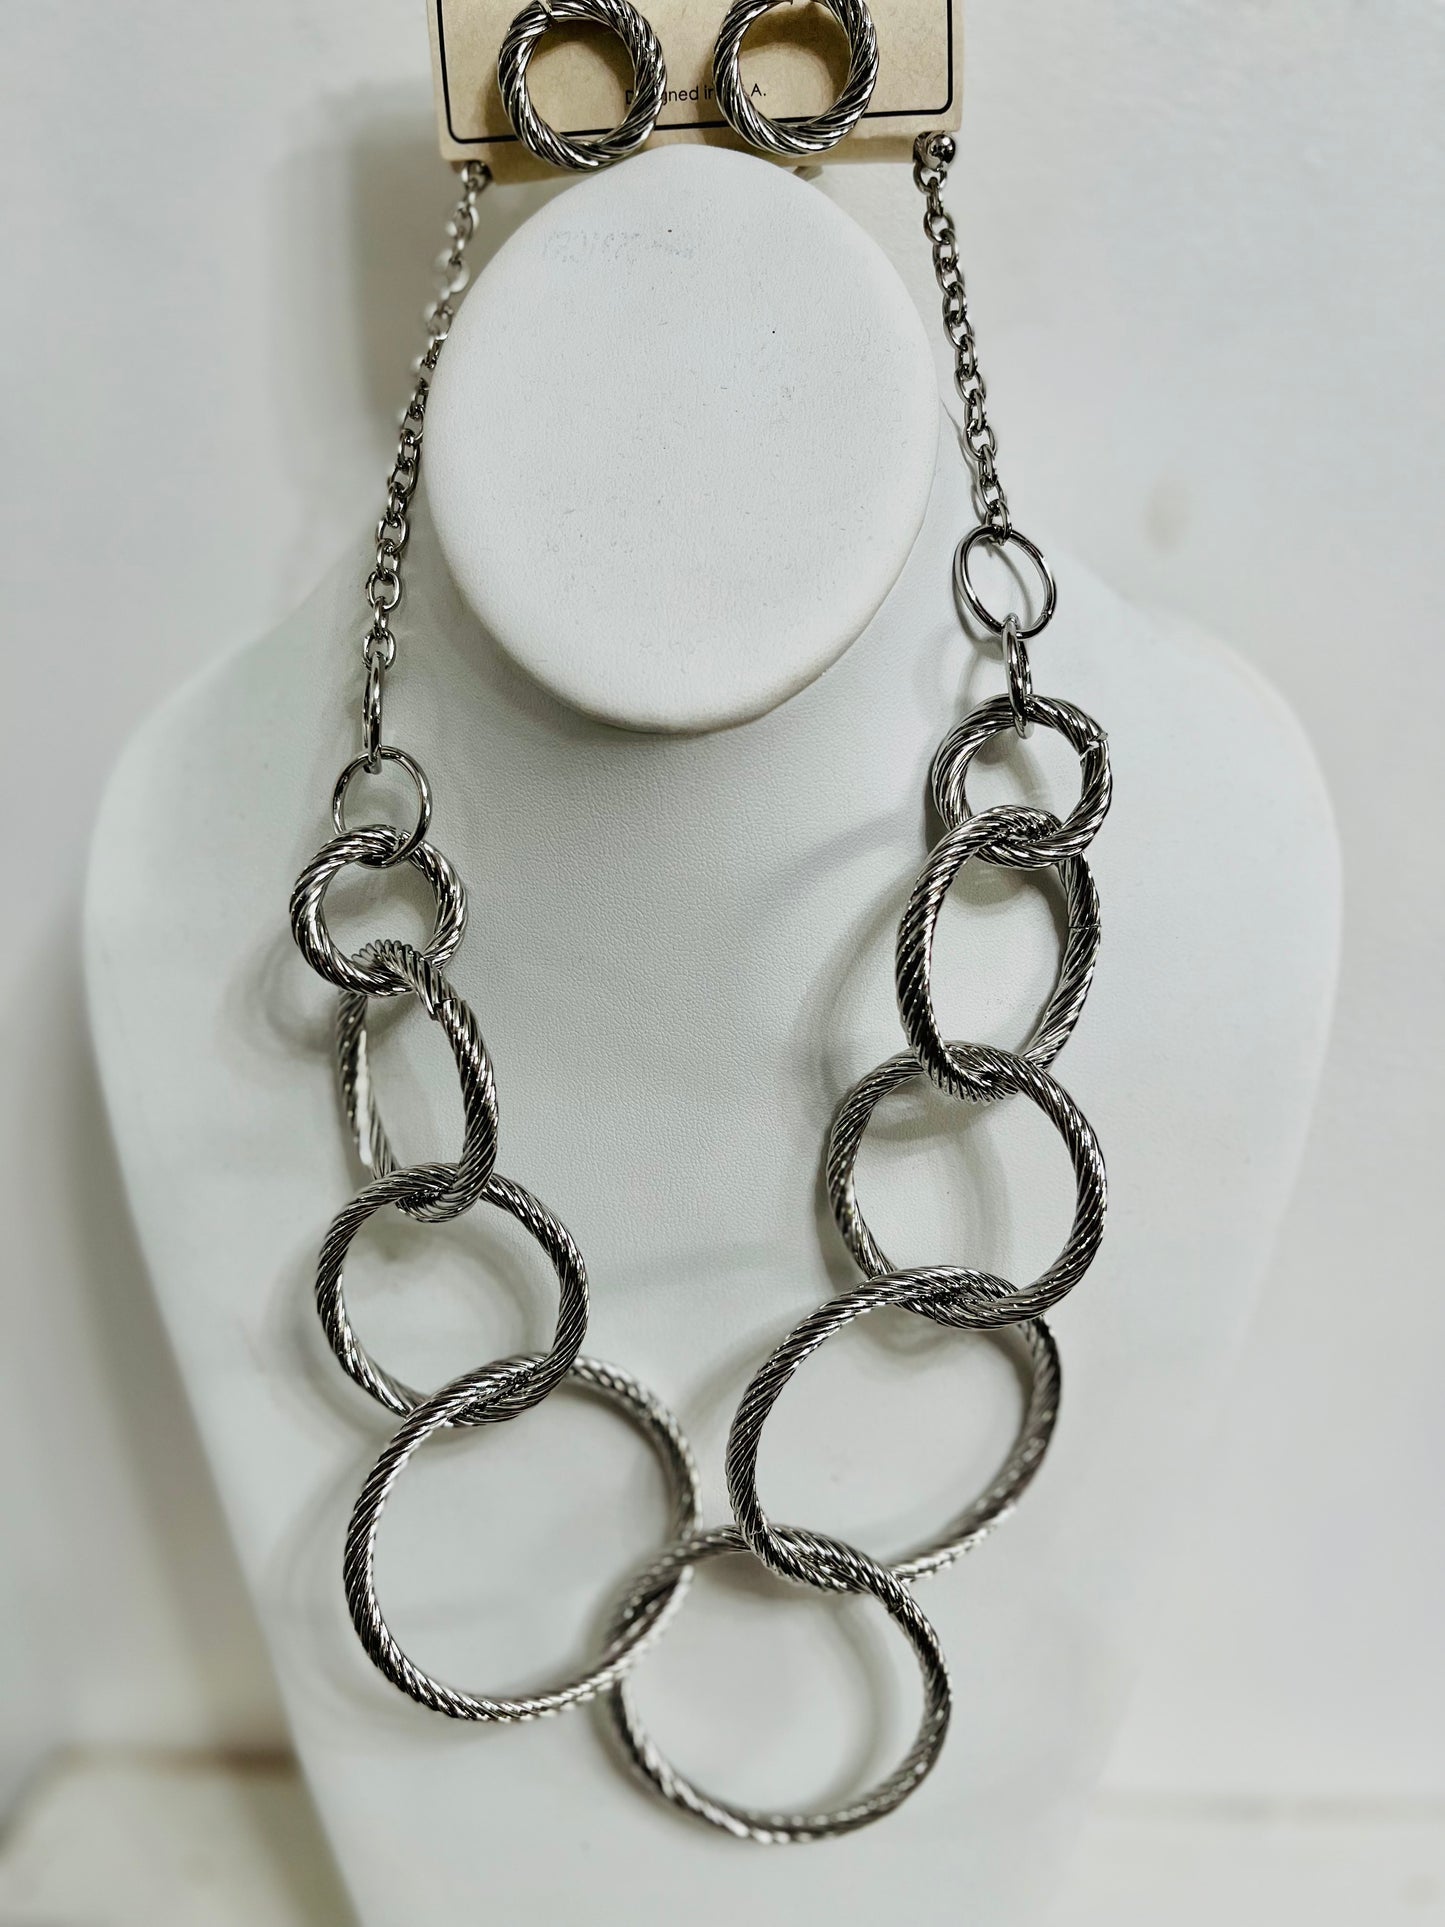 Rings of Beauty Necklace Set